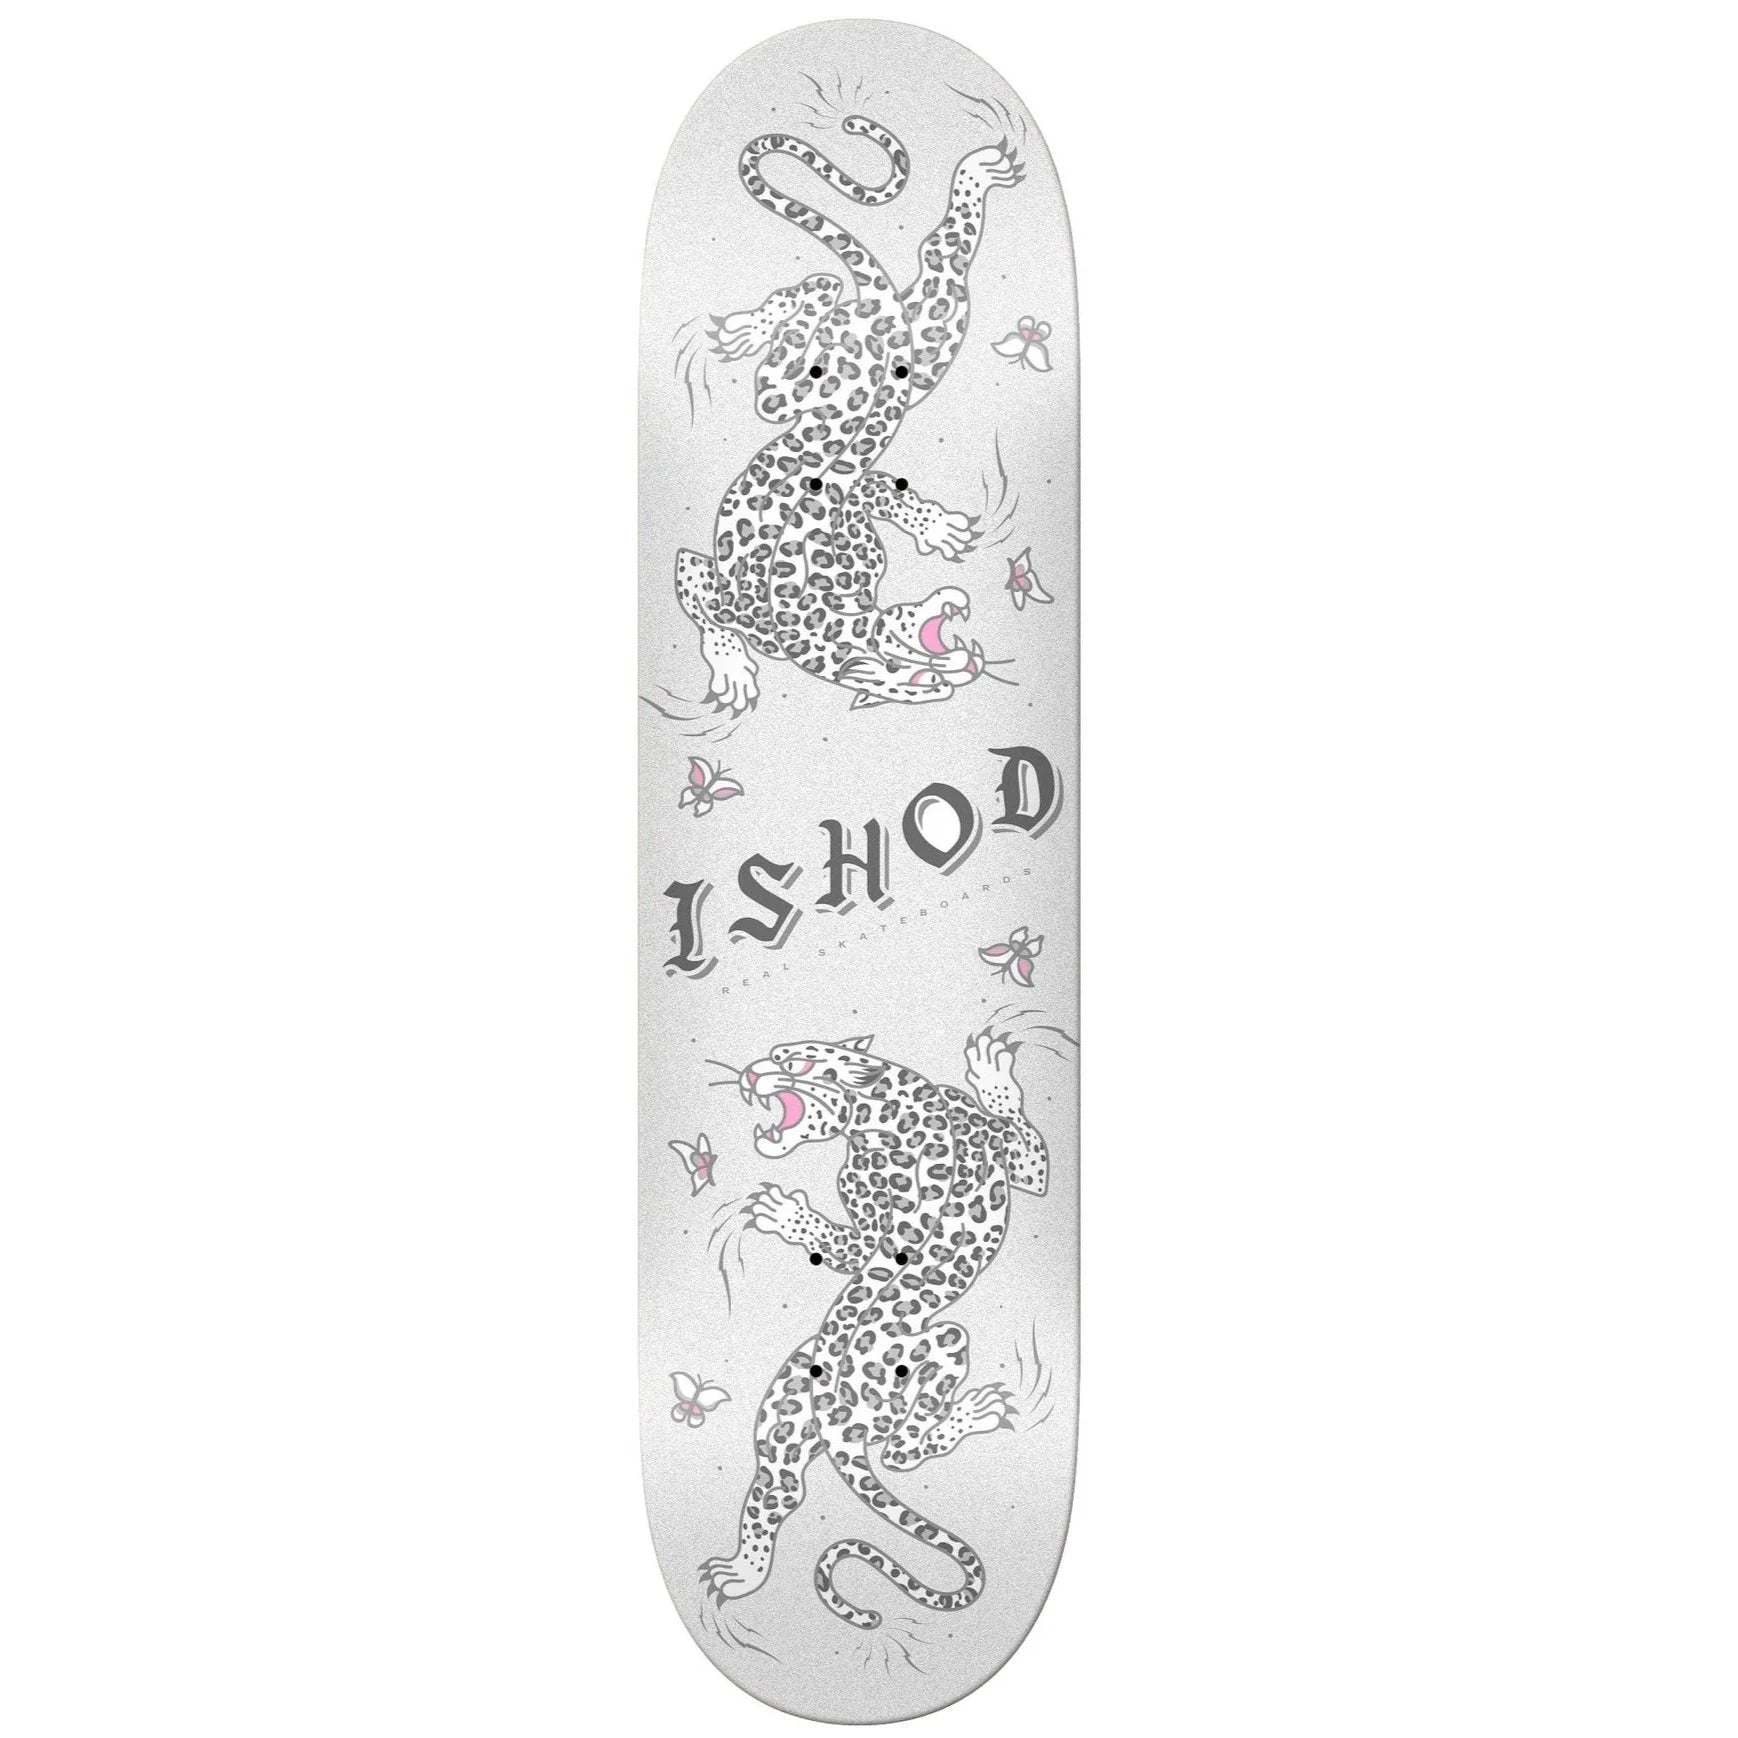 REAL DECK ISHOD SCRATCH GLITTER TWIN TAIL (8.25") - The Drive Skateshop